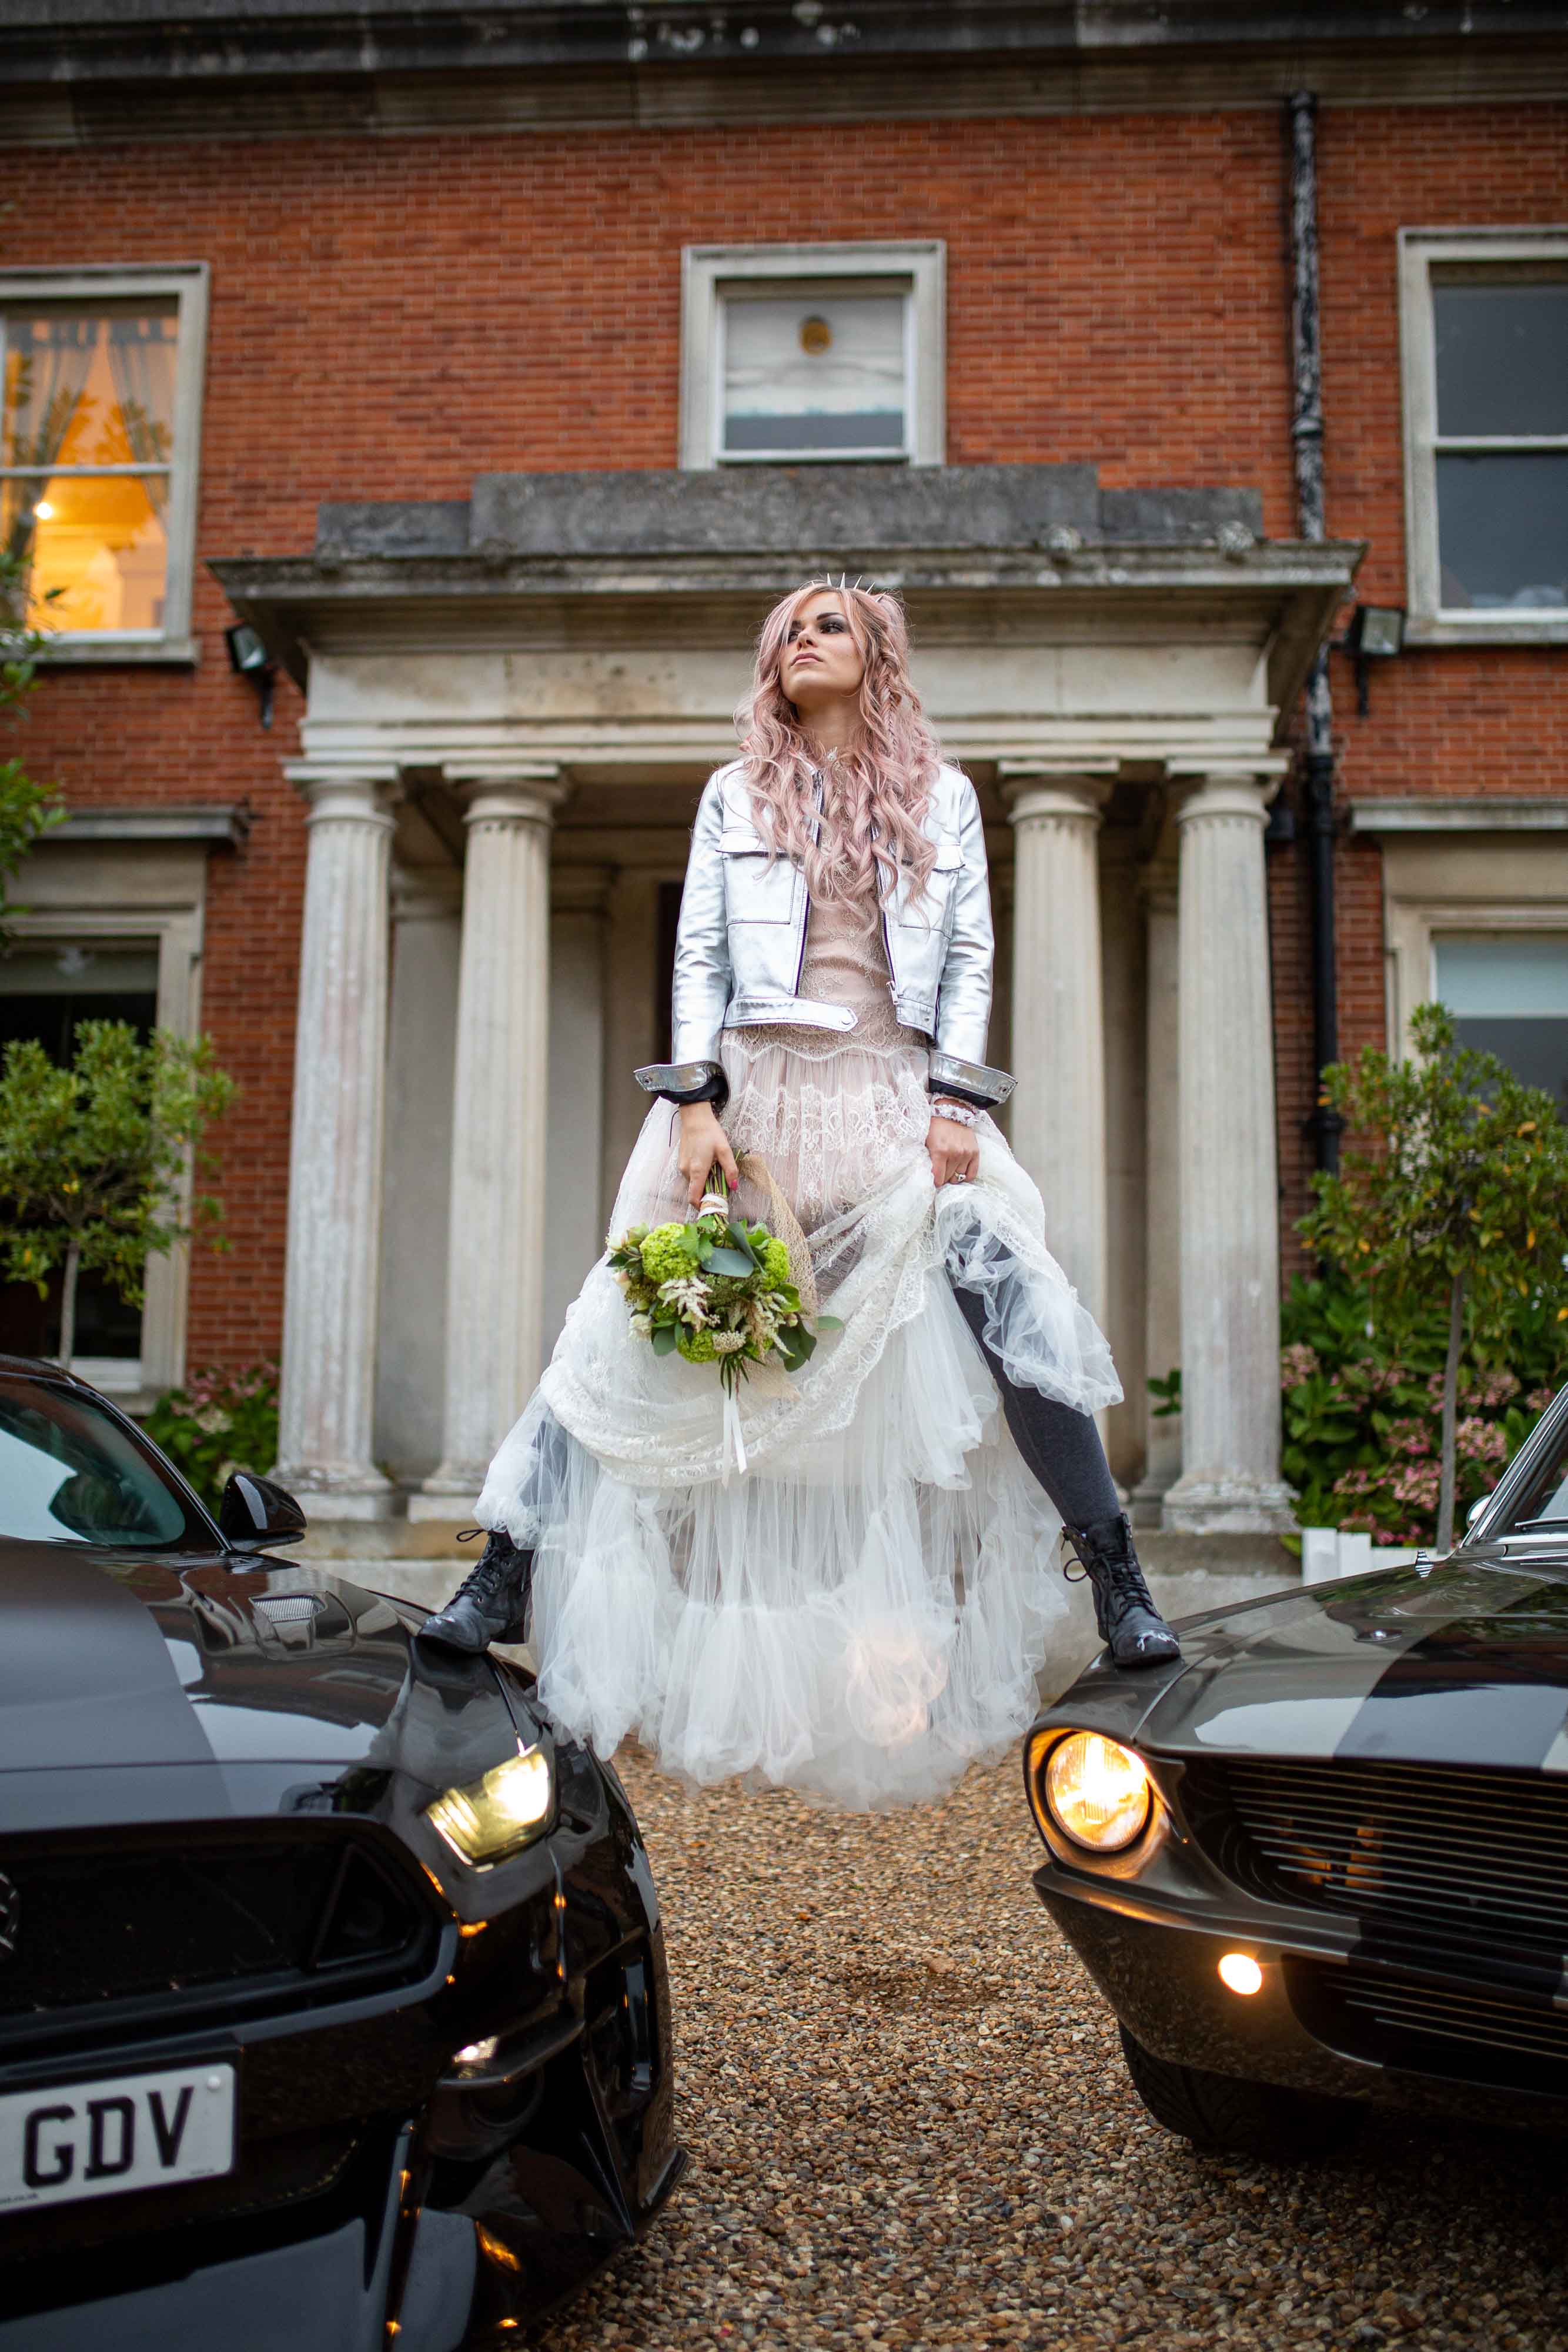 music themed wedding - unique wedding looks inspired by music icons - edgy wedding - rock and roll wedding - grunge wedding - courtney love style- bride standing on cars